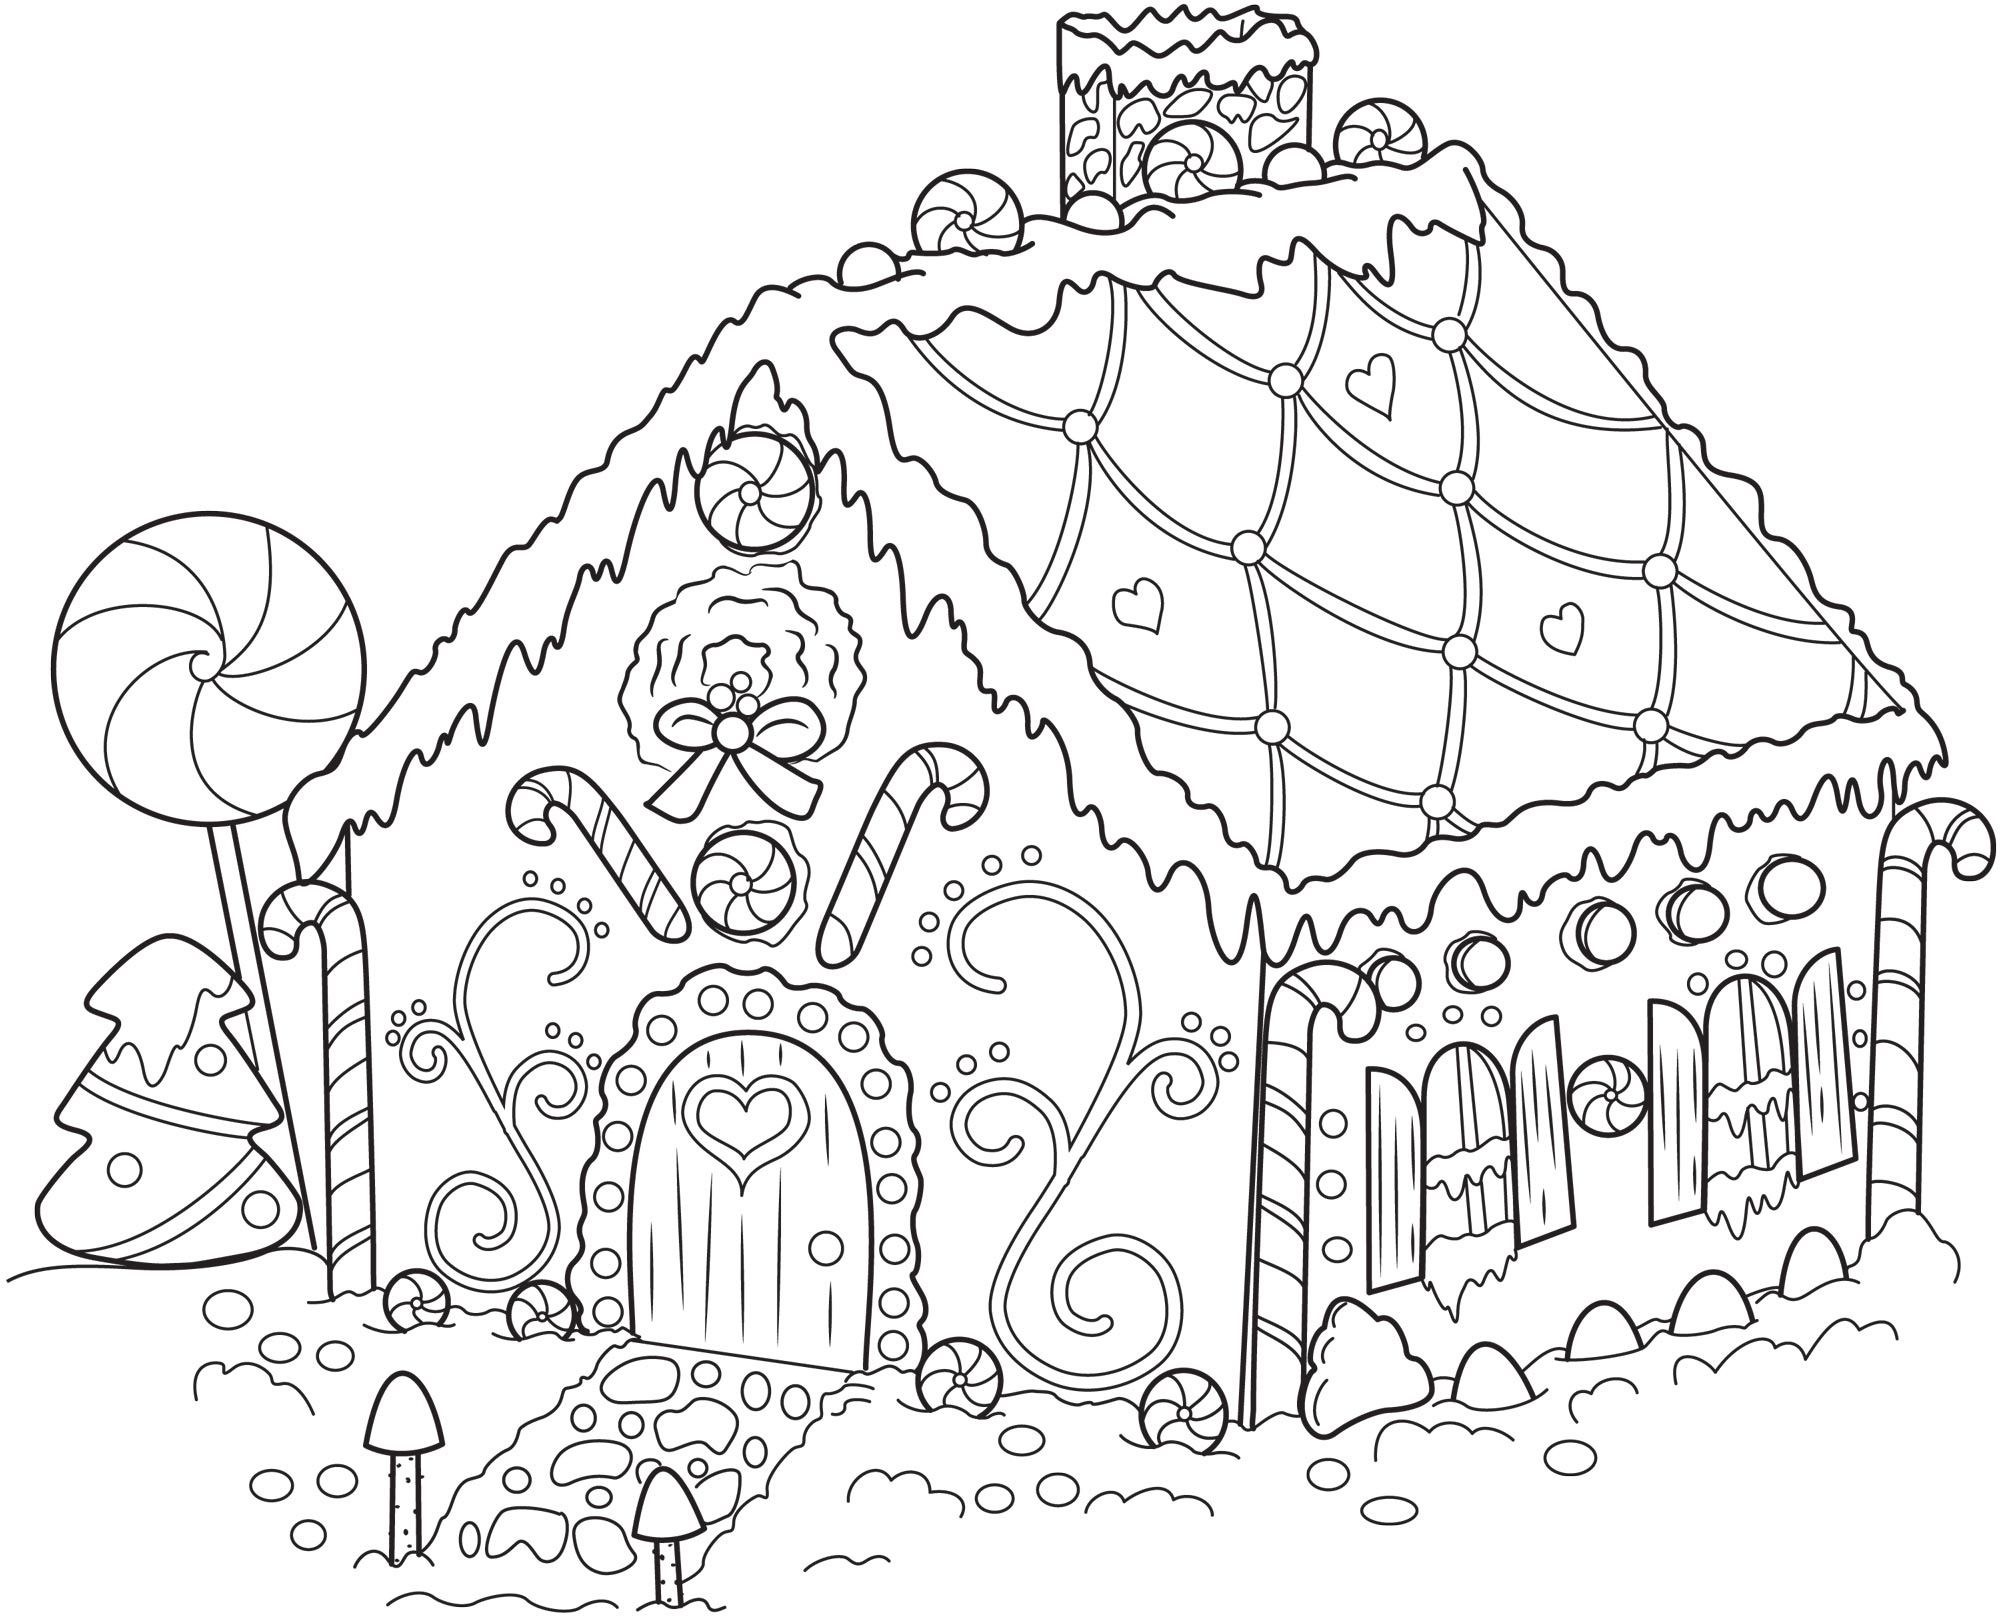 Blank Gingerbread Man Coloring Page Gingerbread Man Coloring Page ...